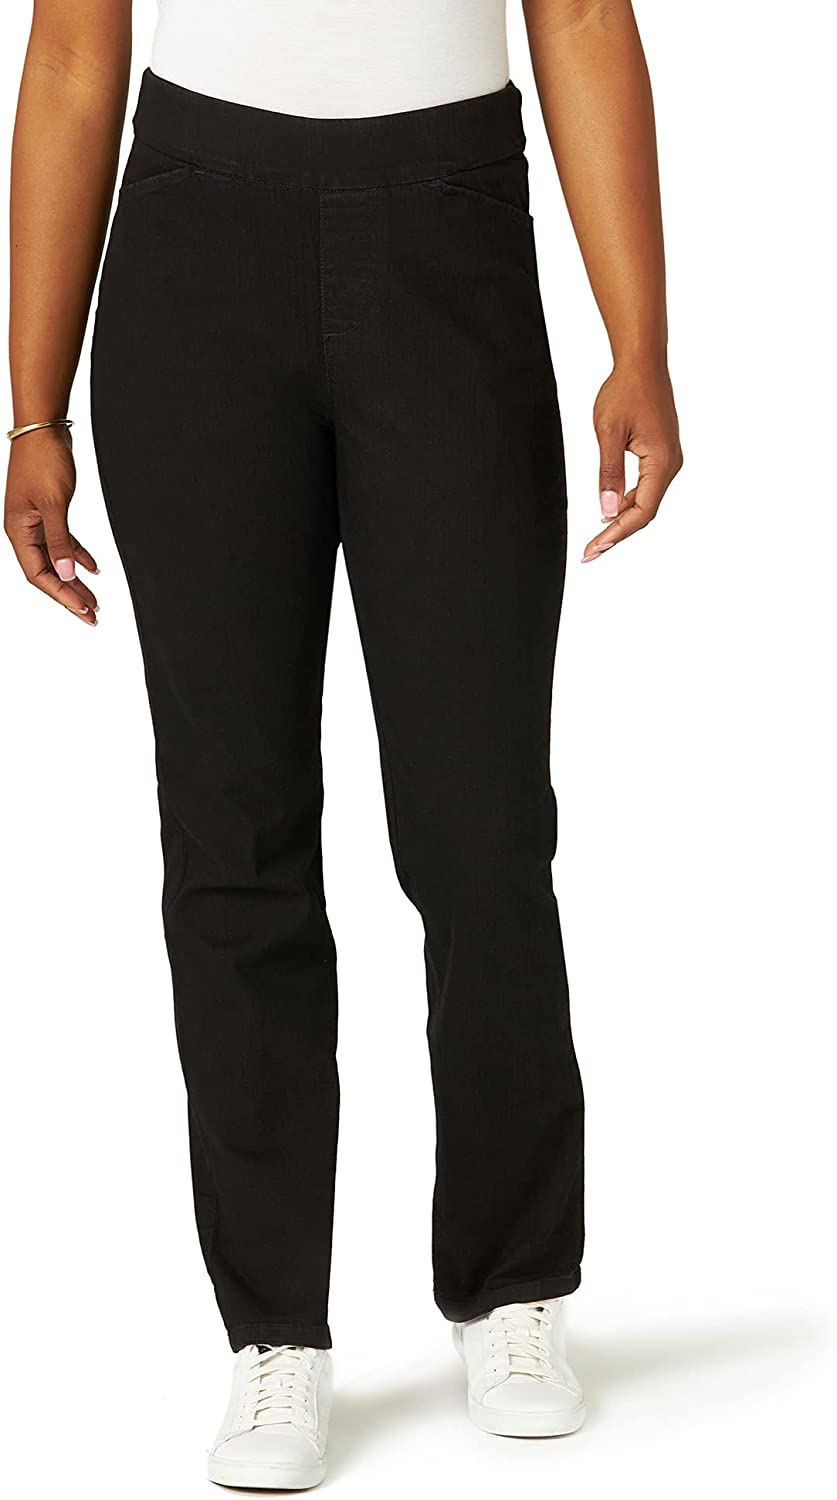 Chic Classic Collection Women's Easy-fit Elastic-Waist Pant | eBay